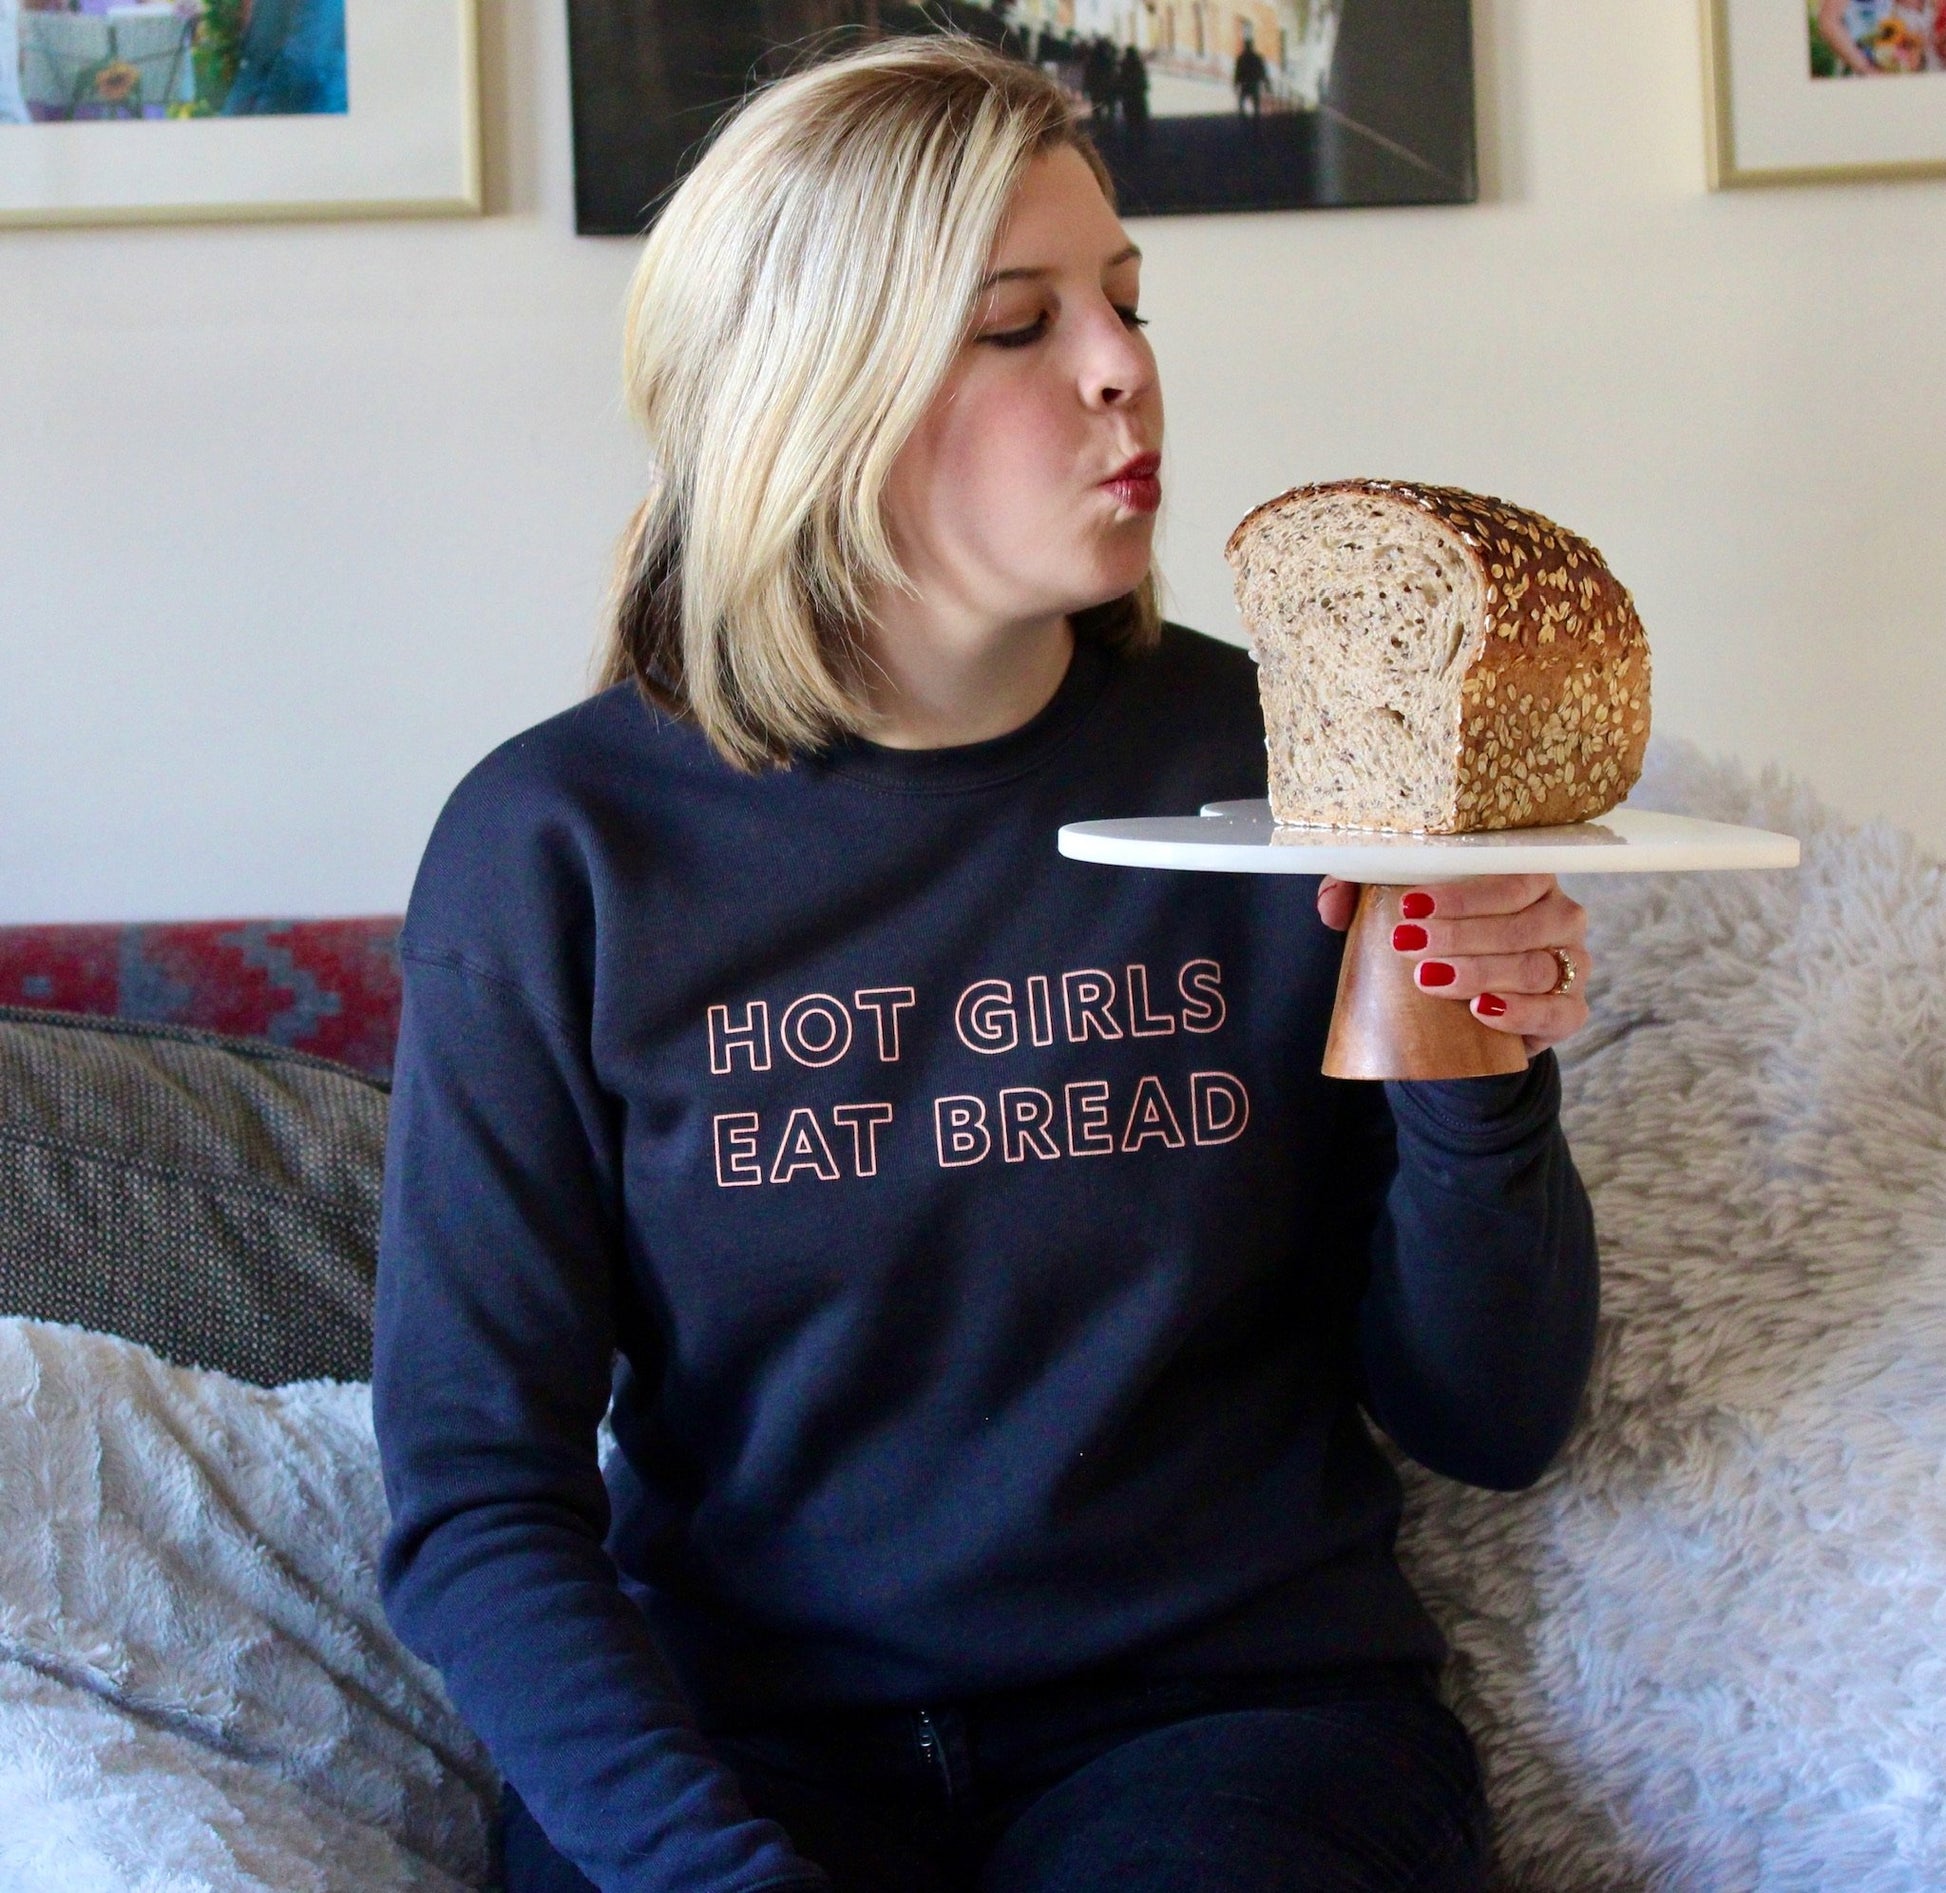 A woman wears a dark grey crewneck that reads "Hot Girls Eat Bread" and holds up a loaf of bread